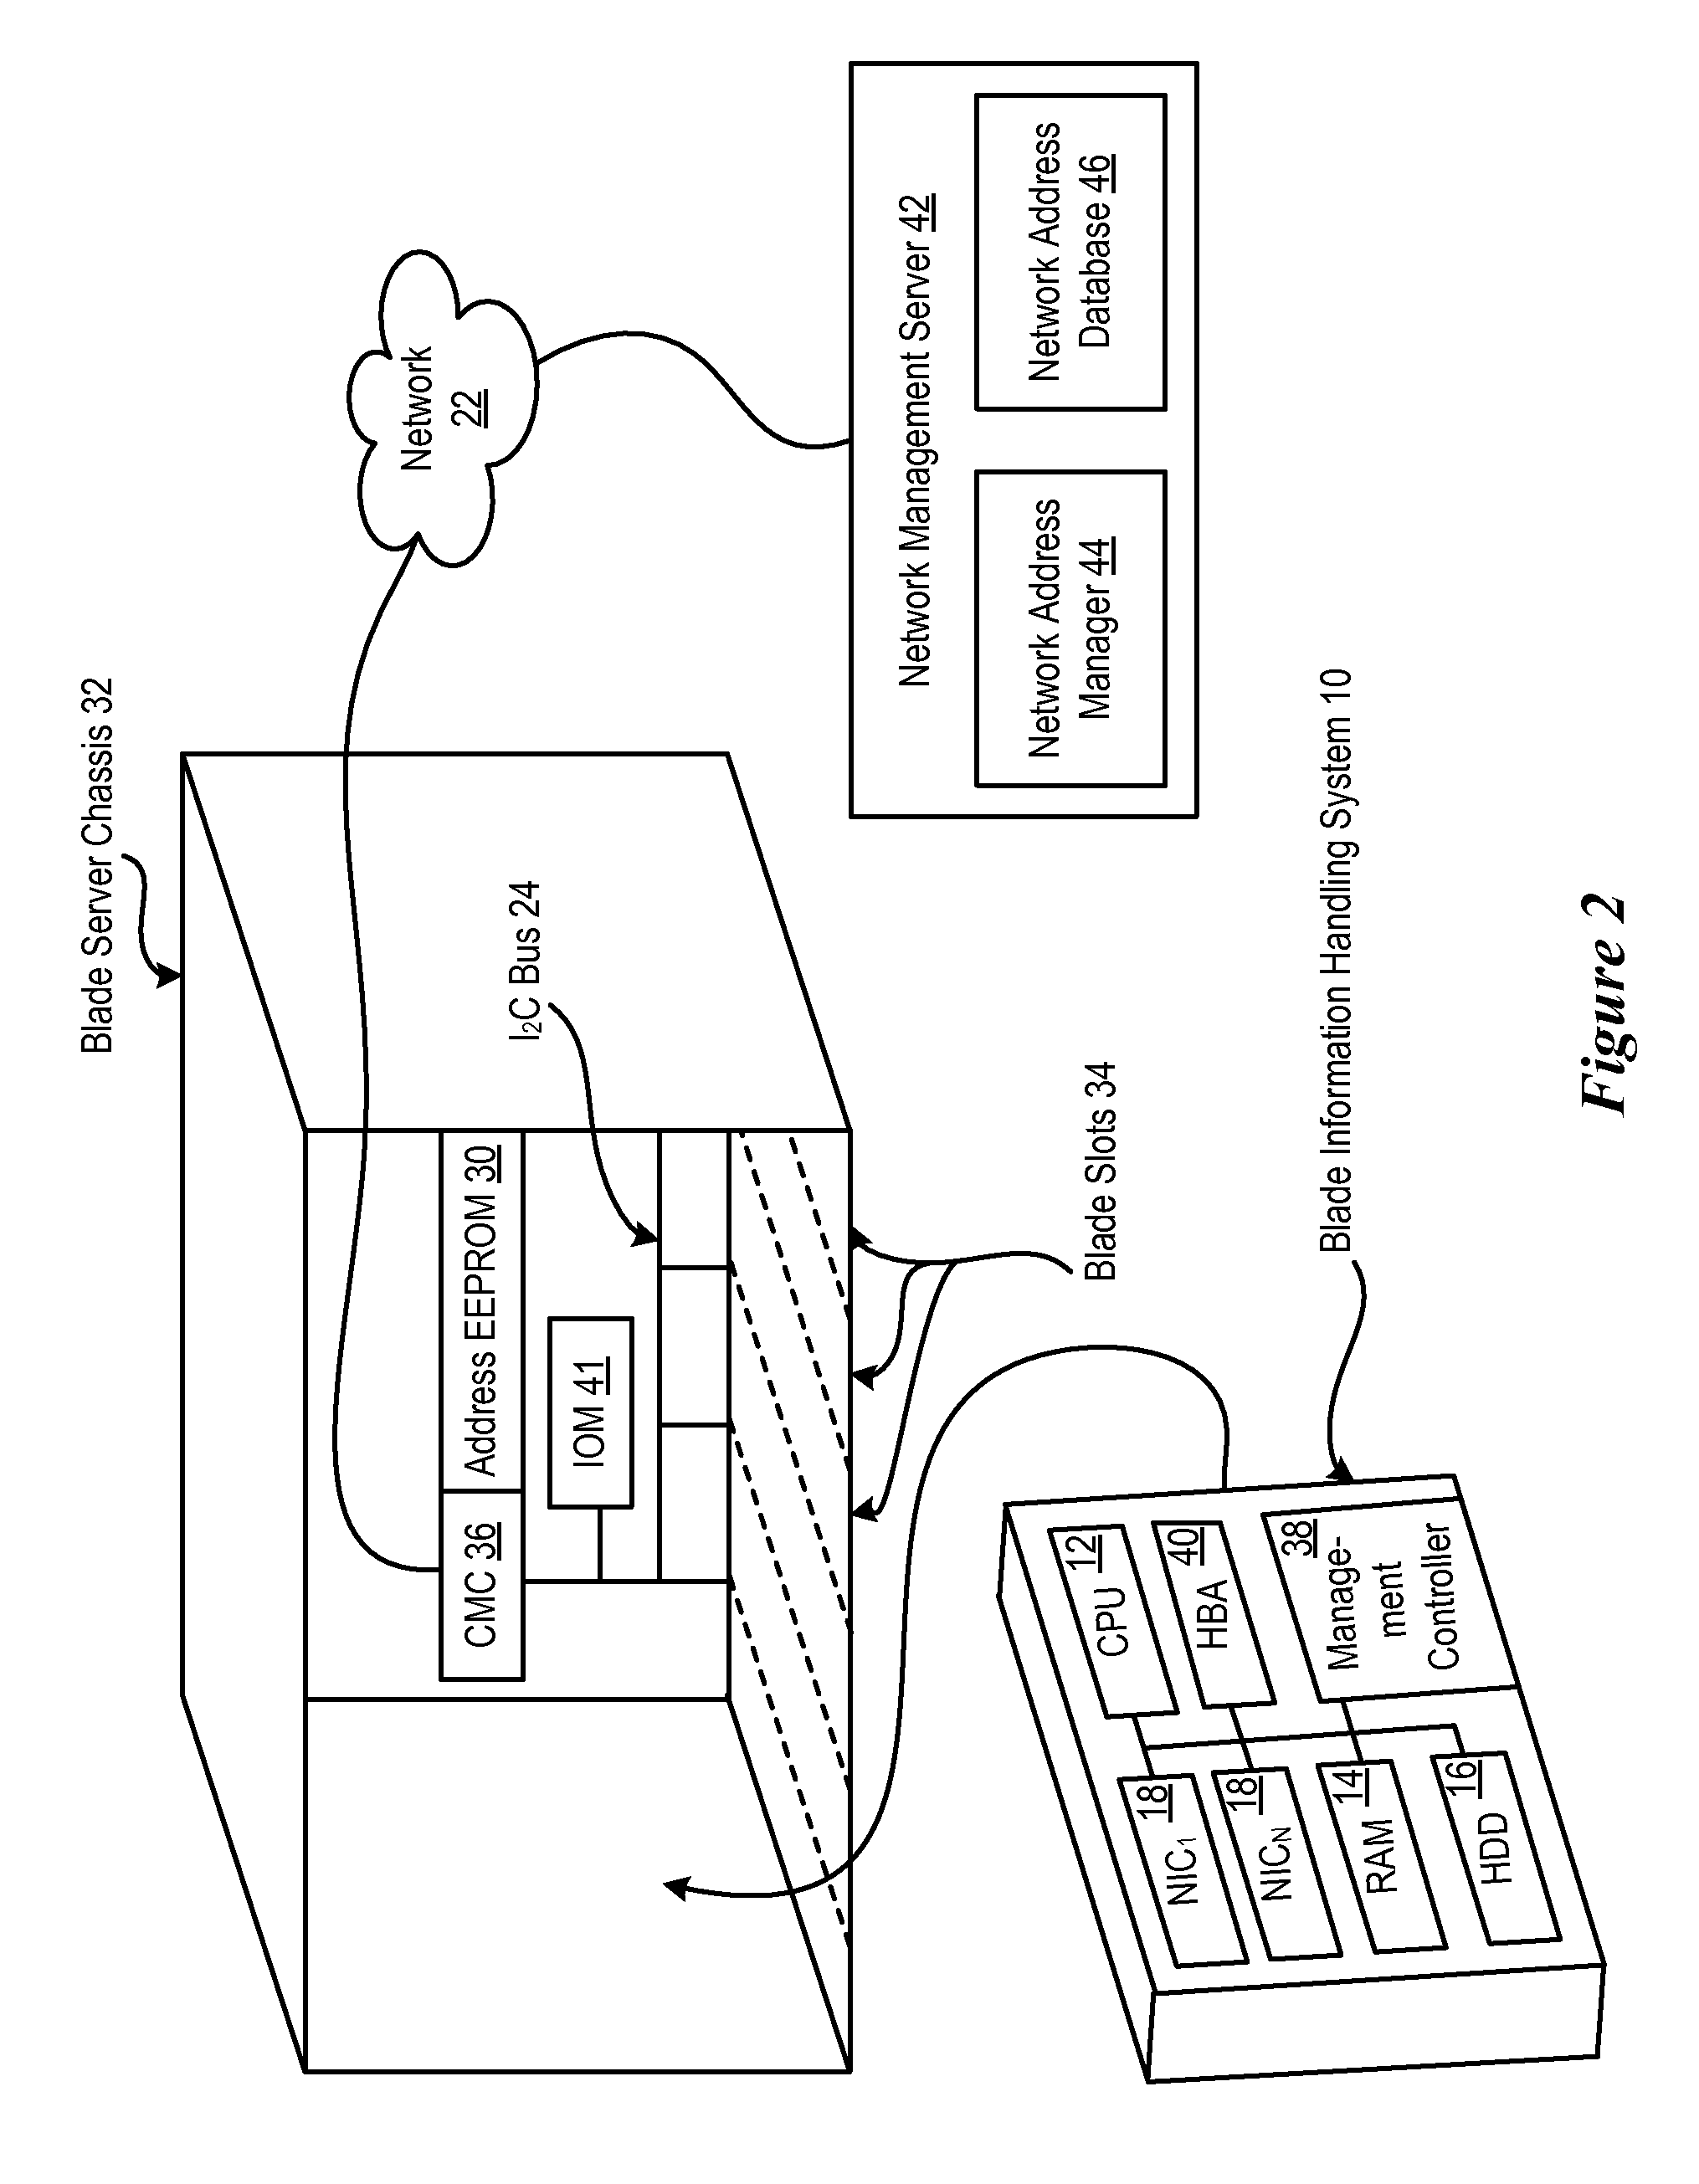 System And Method For Assigning Addresses To Information Handling Systems